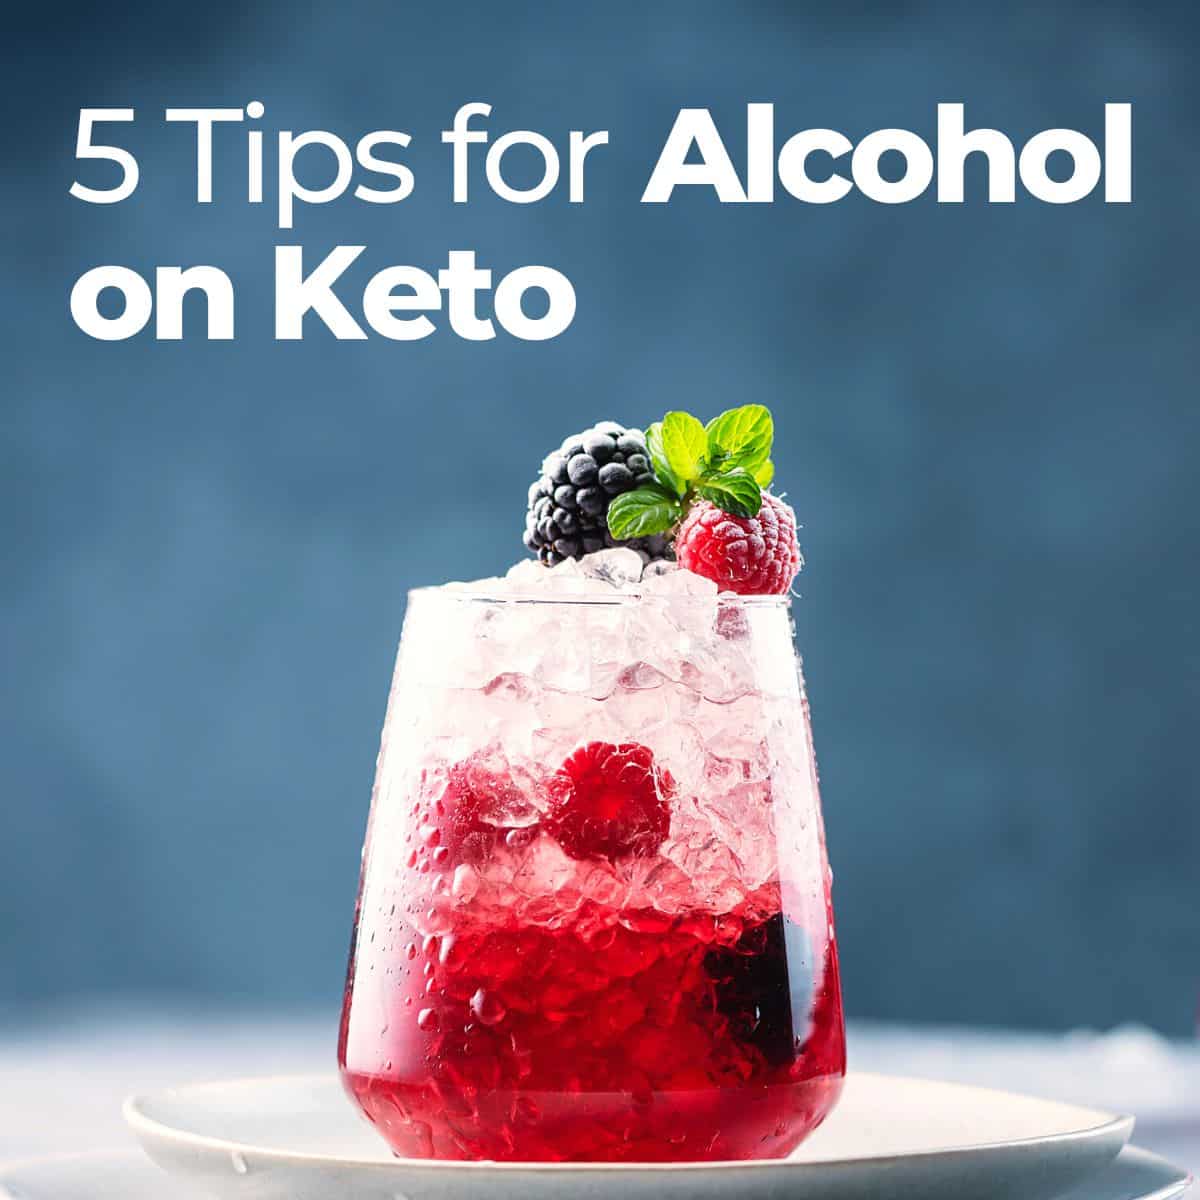 5 Easy Tips For Drinking Alcohol on Keto